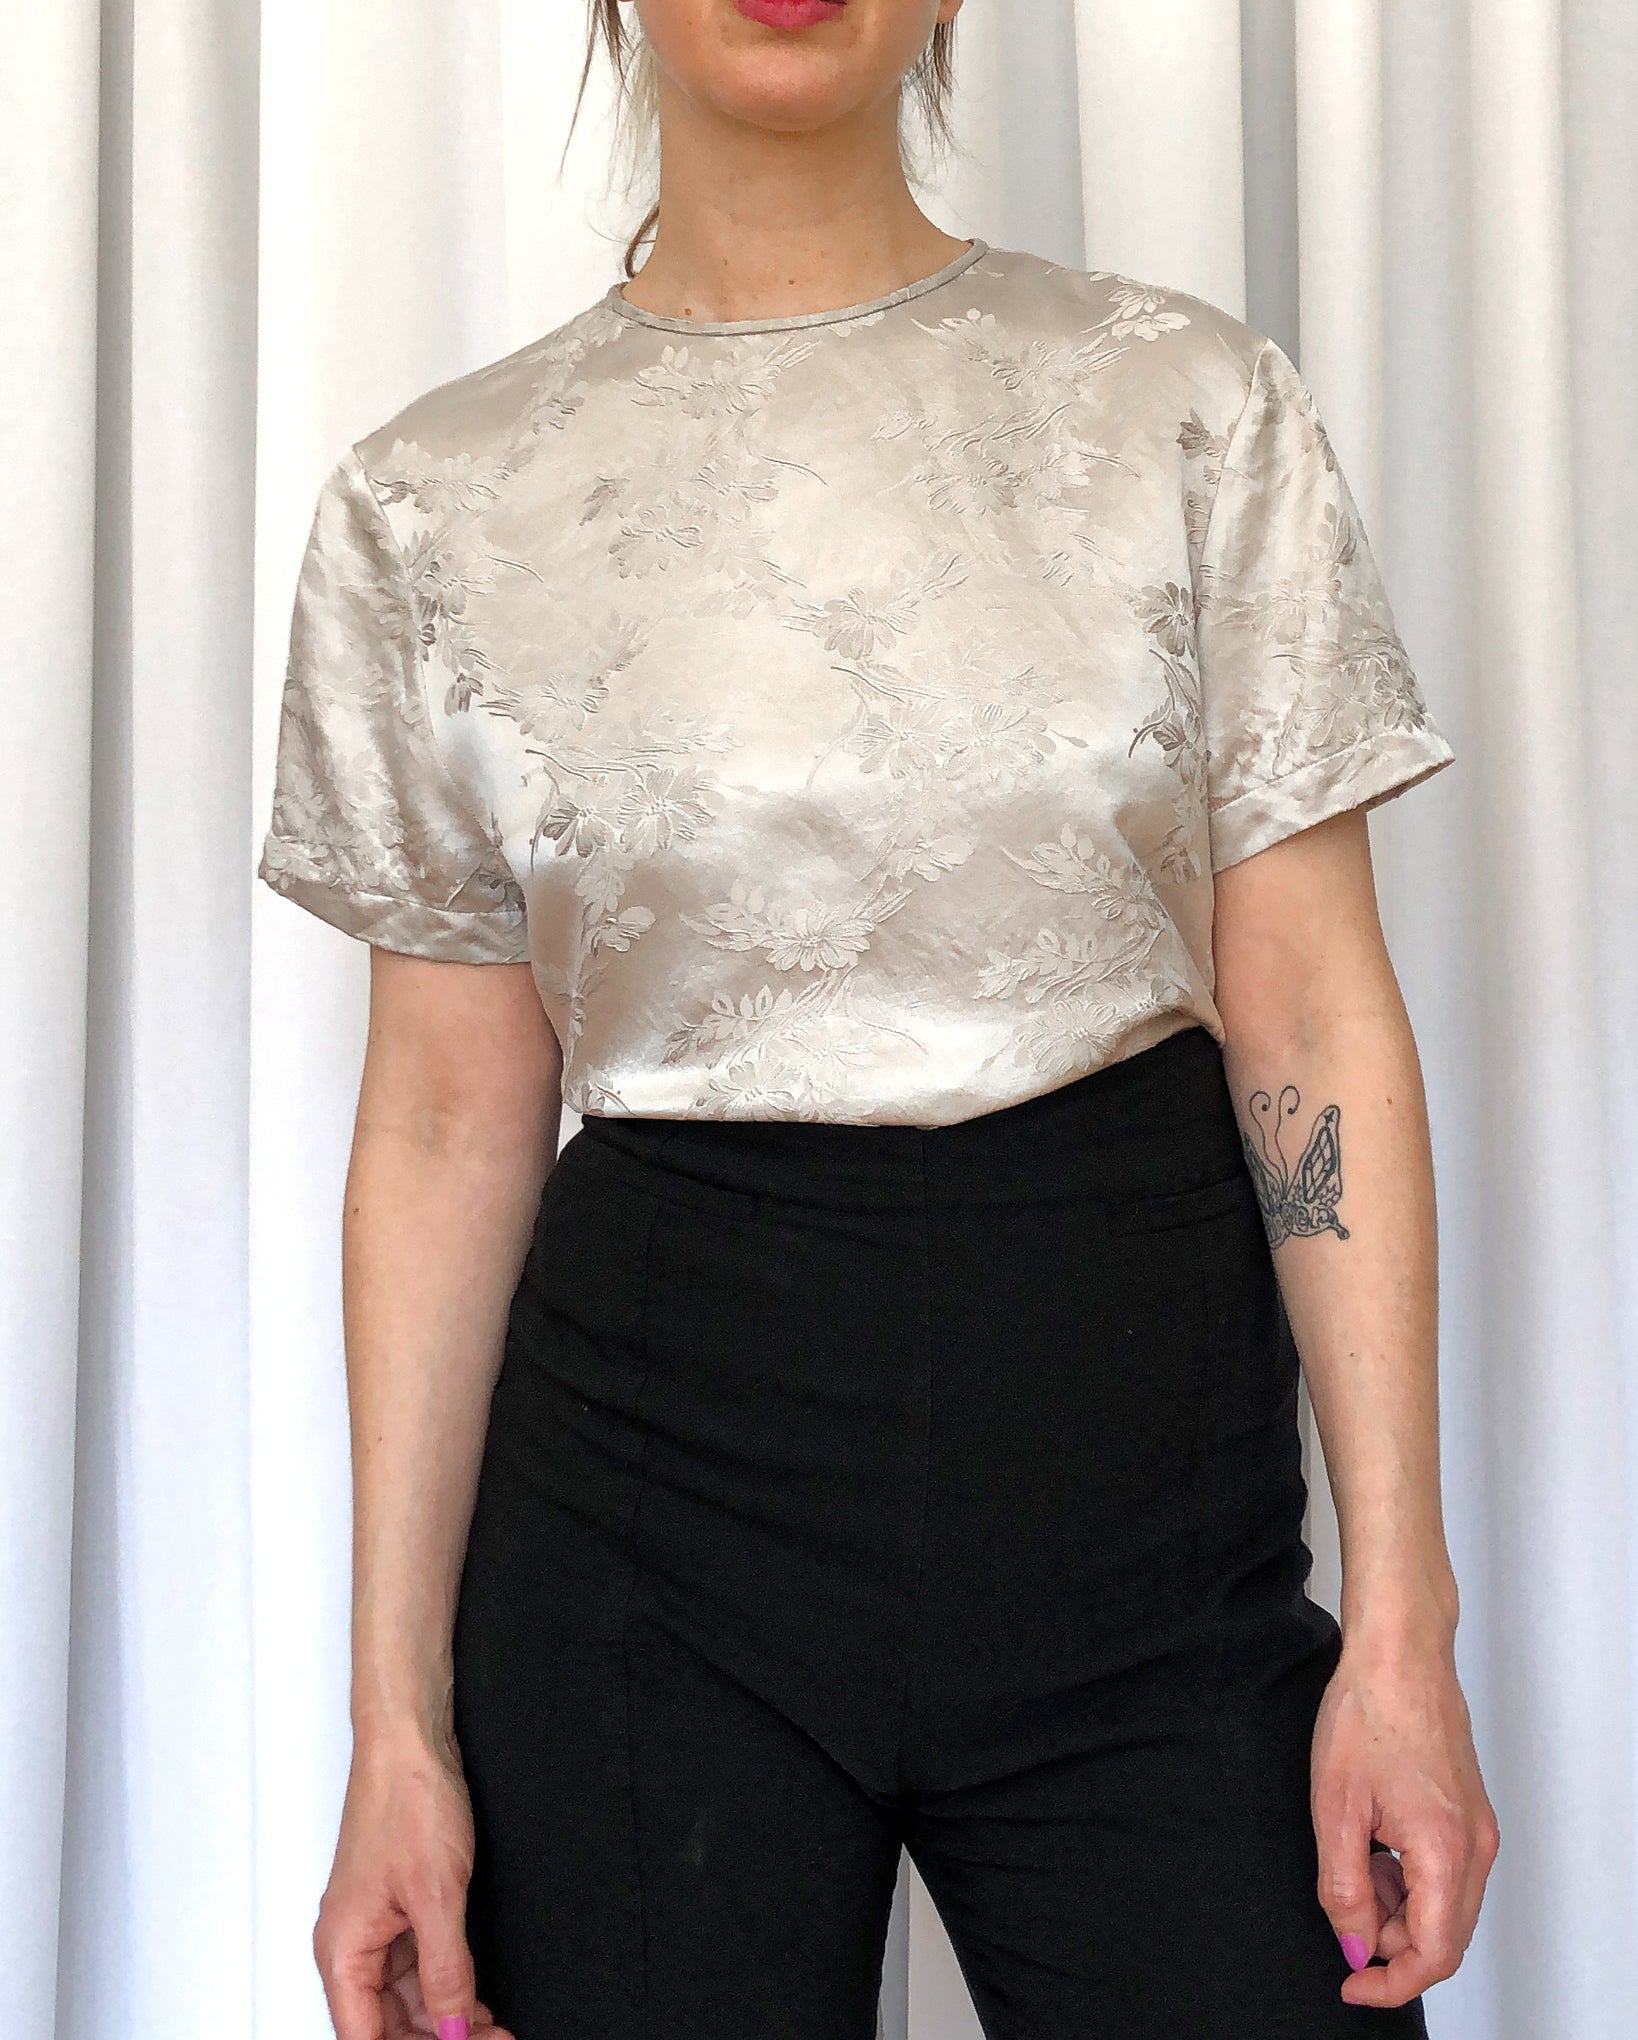 90s Silver Silk T Shirt With Jacquard Floral Details, Vintage 1990s Light Summer Blouse by Melanie Lynn, Shiny 90s Top Size Small